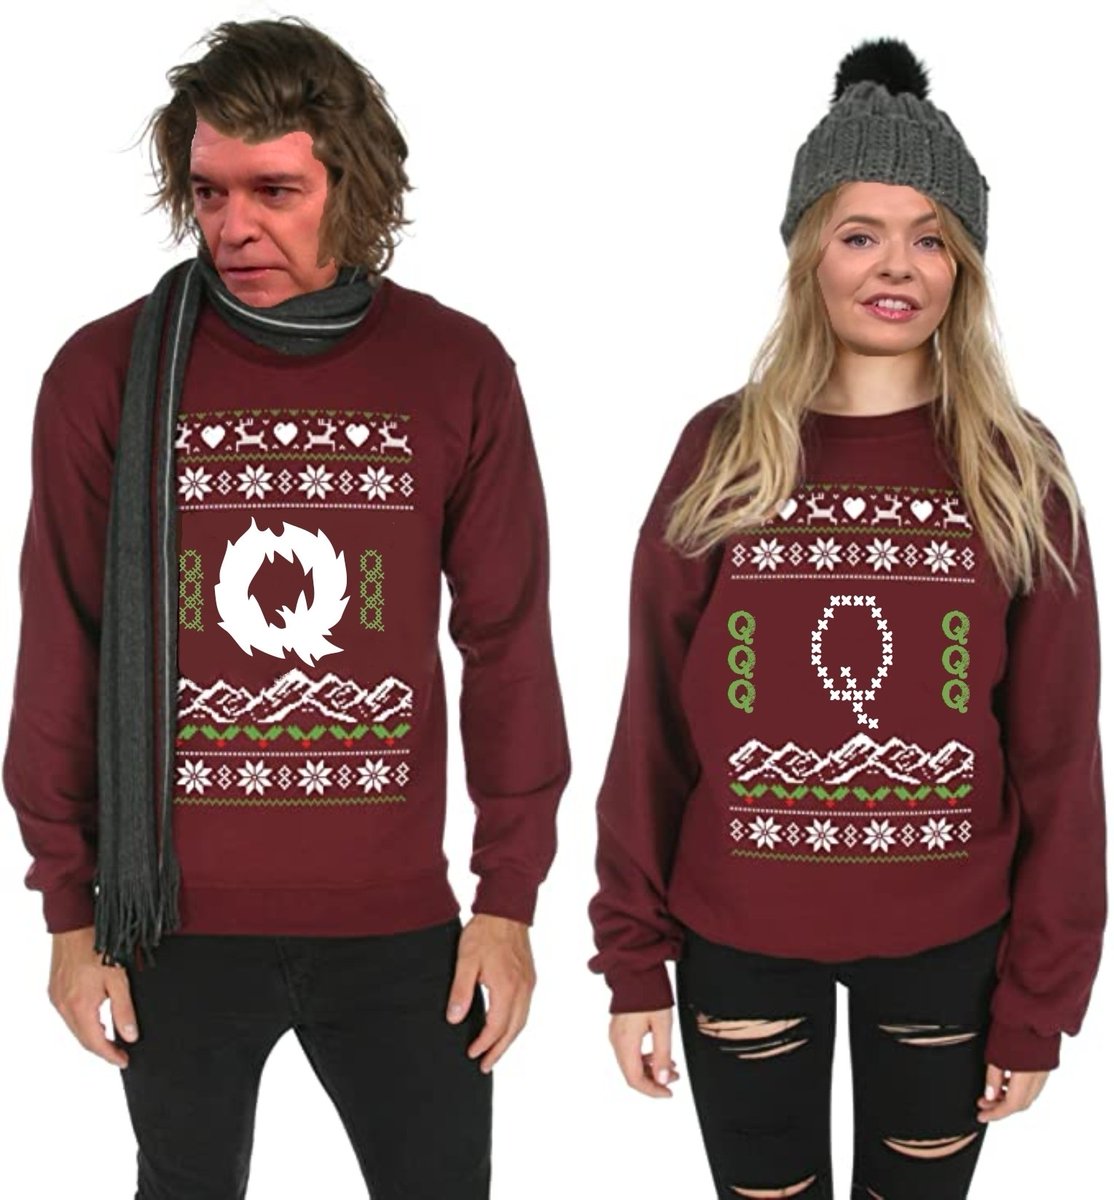 This year's predicted big Christmas fashion accessory - Q Jumpers by Phil and Holly ! #philandholly #HollyandPhil #queuejumpers #QJumpers #PhillipSchofield #HollyWilloughby #queensfuneral